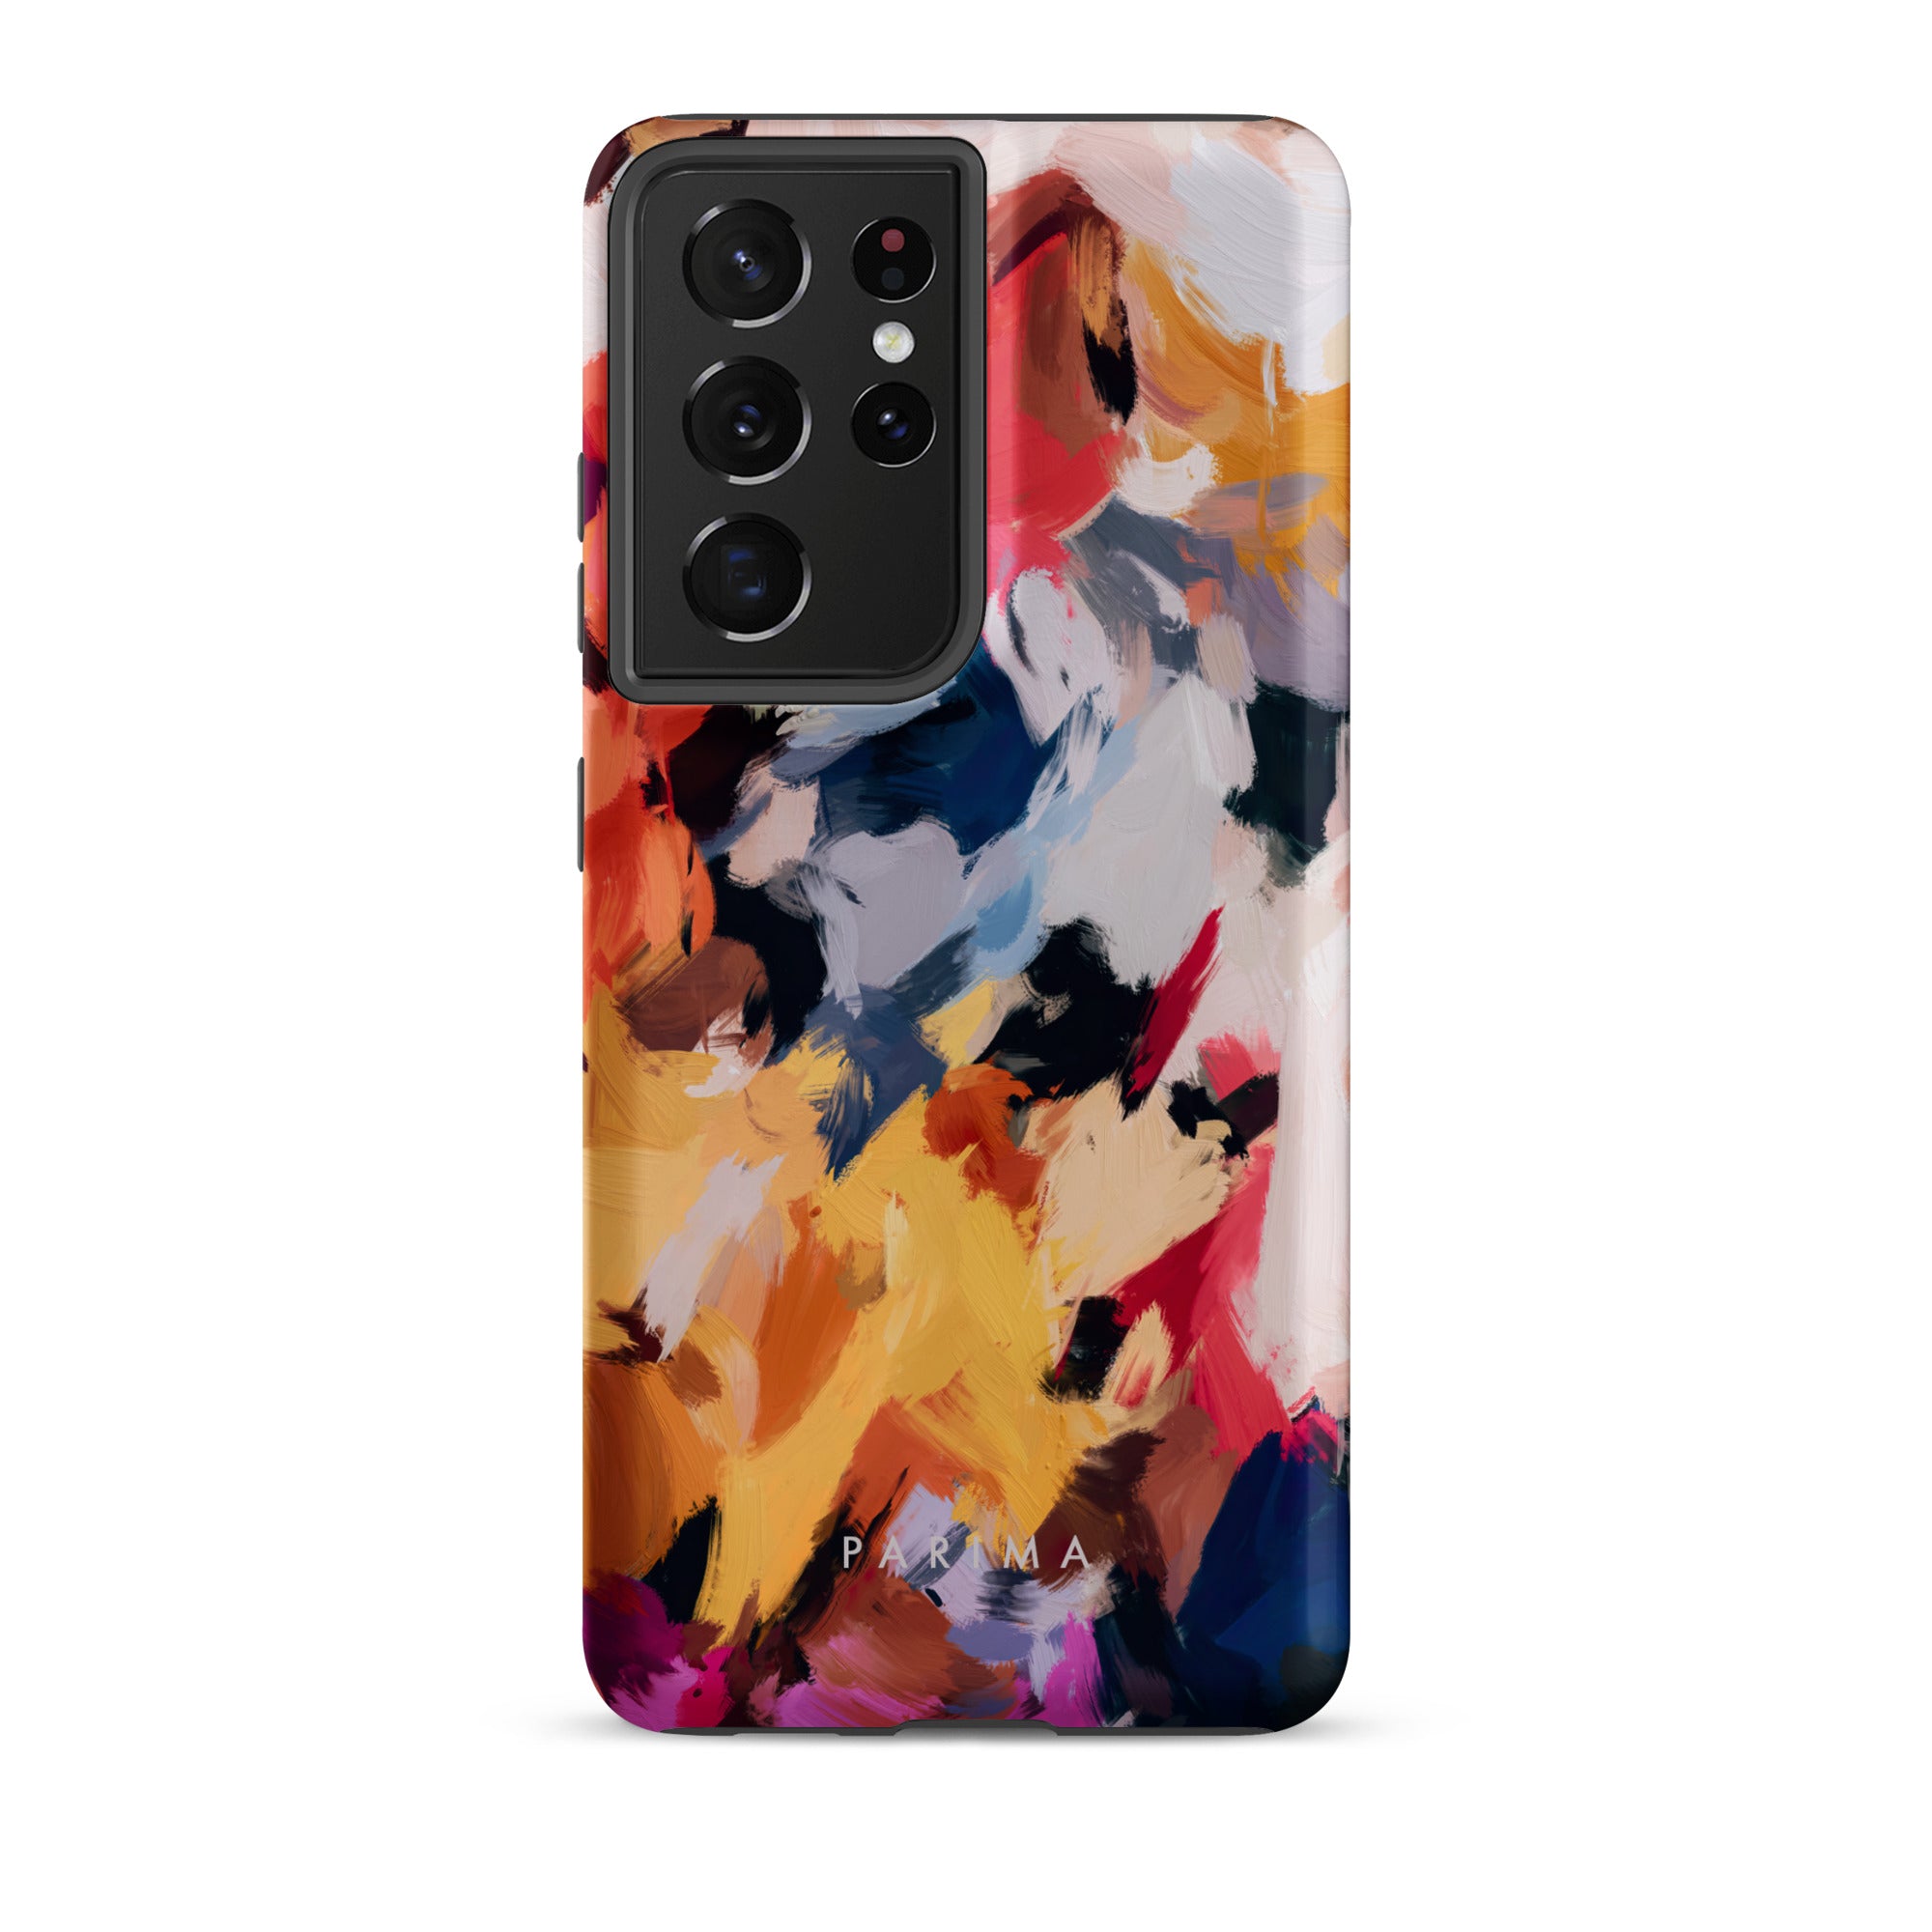 Wilde, blue and yellow multicolor abstract art on Samsung Galaxy S21 Ultra tough case by Parima Studio